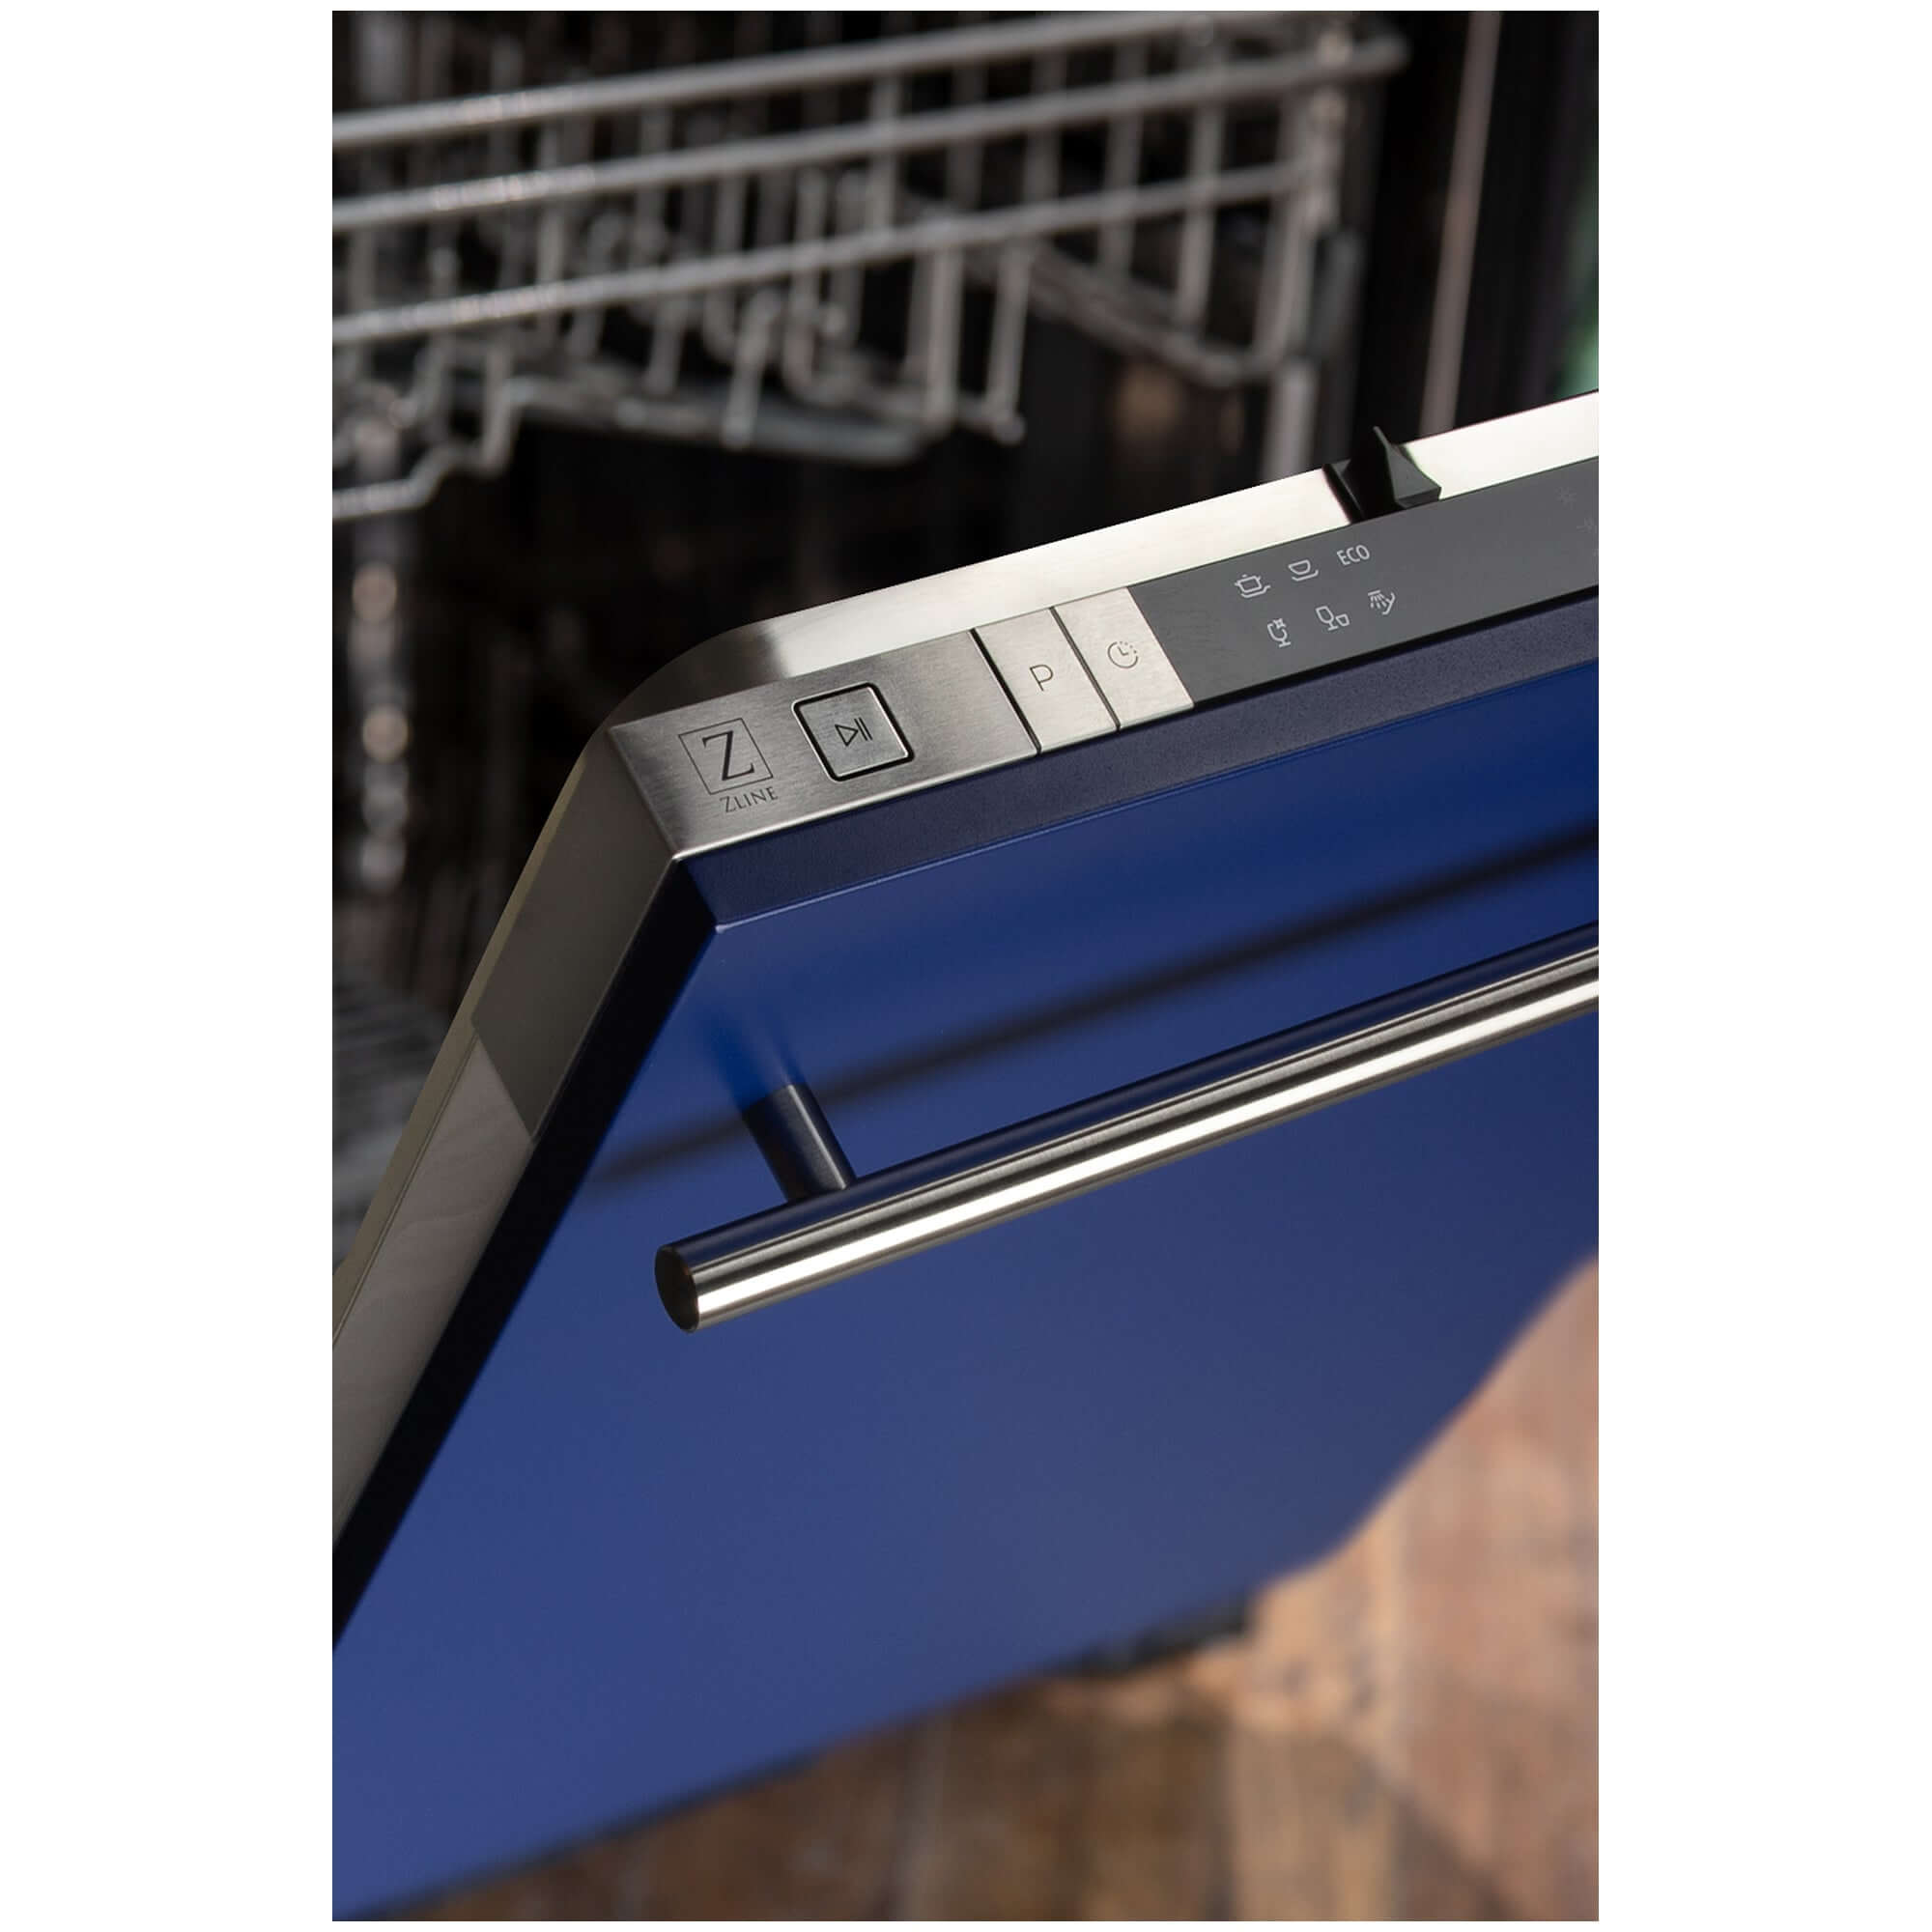 ZLINE 18 in. Compact Top Control Dishwasher with Blue Matte Panel and Modern Style Handle, 52 dBa (DW-BM-H-18)